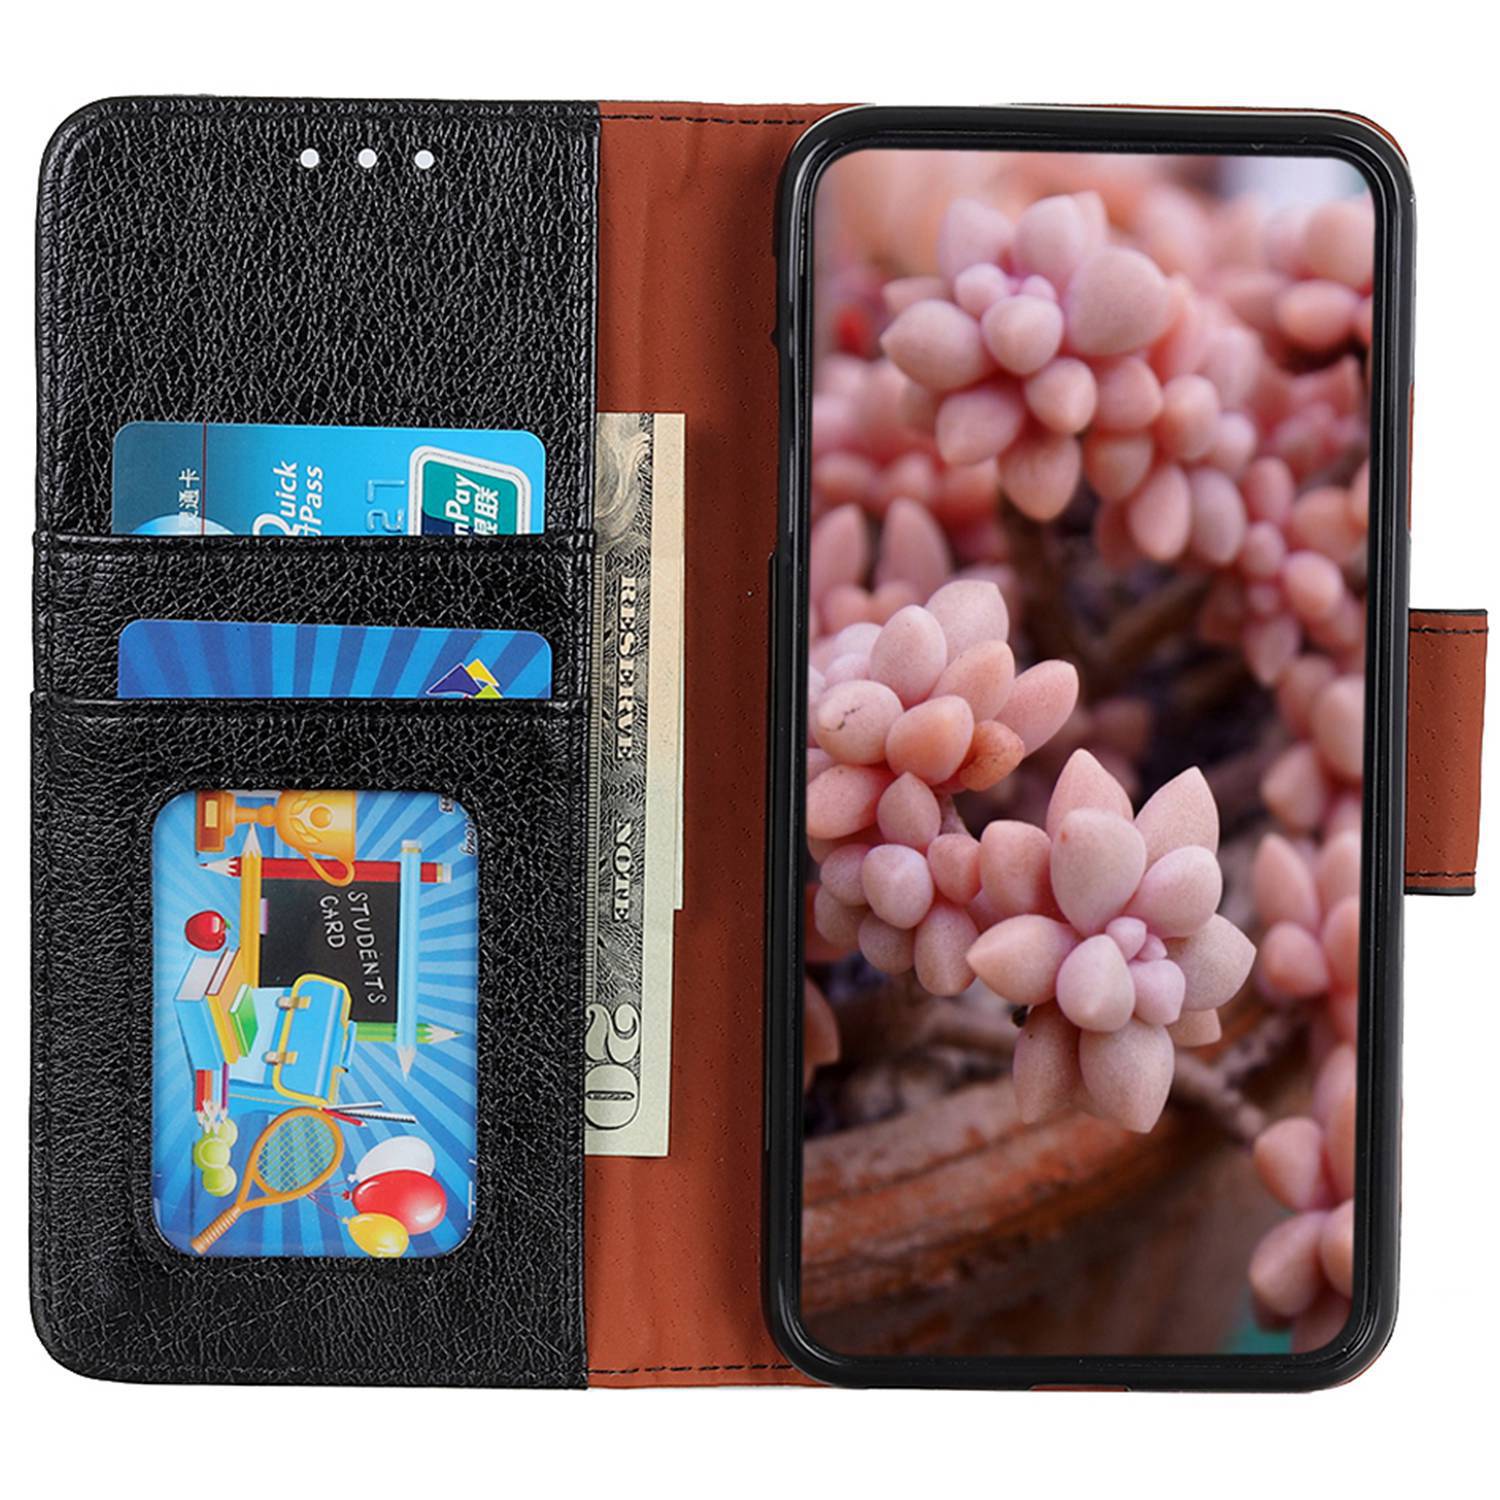 For OnePlus 11 5G Nappa Texture Split Leather Flip Case Stand Wallet Magnetic Clasp Phone Cover - Black